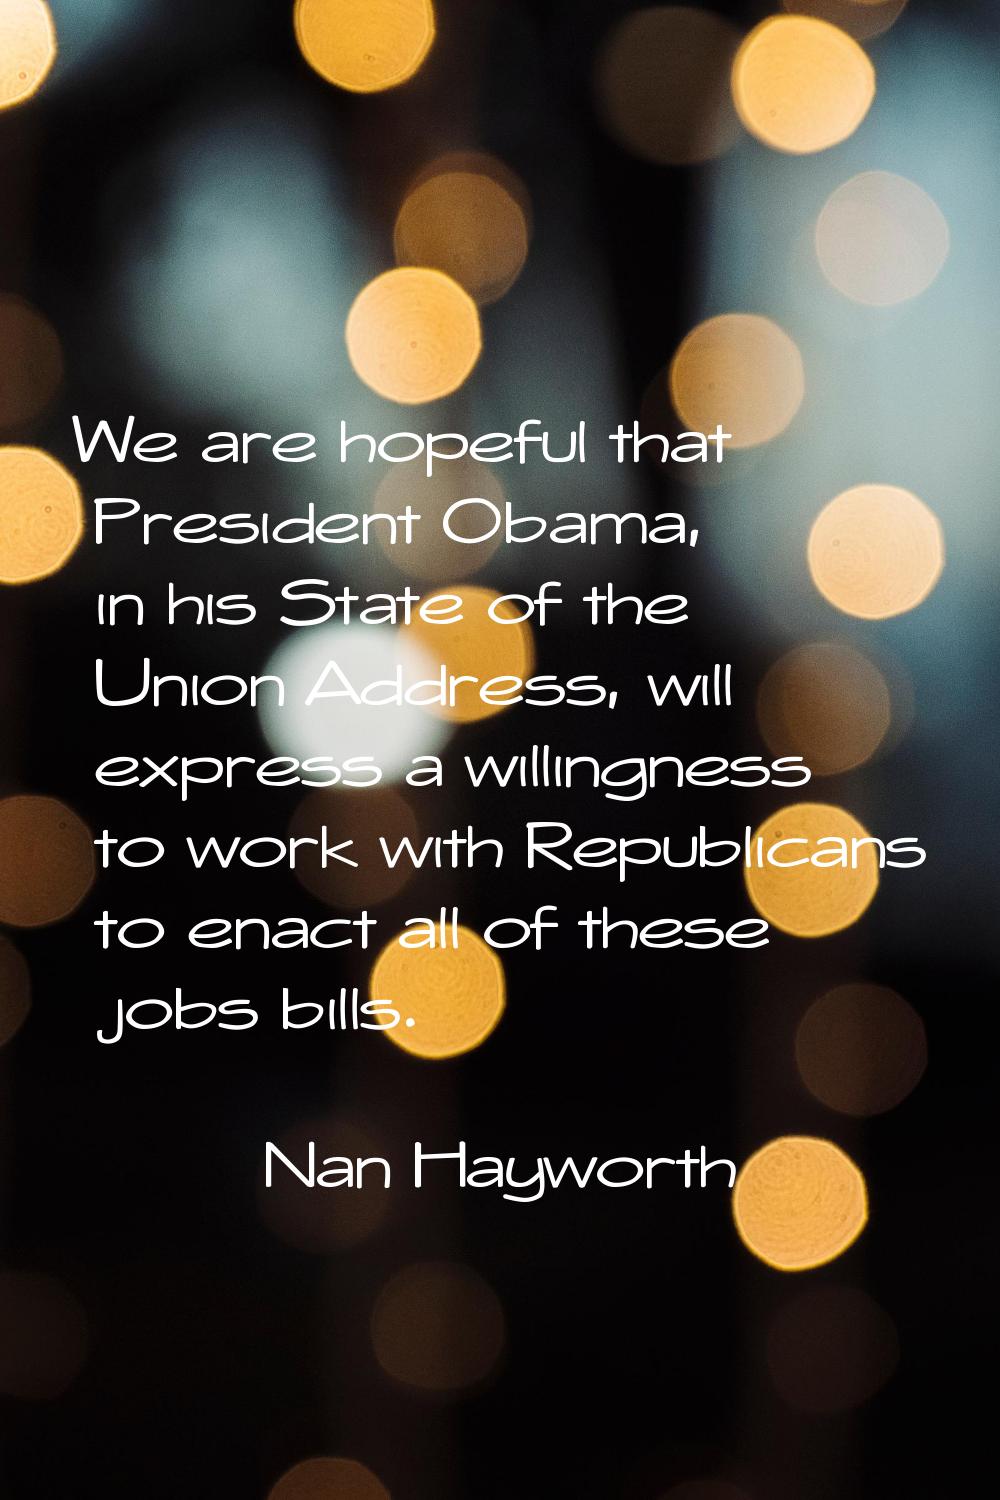 We are hopeful that President Obama, in his State of the Union Address, will express a willingness 